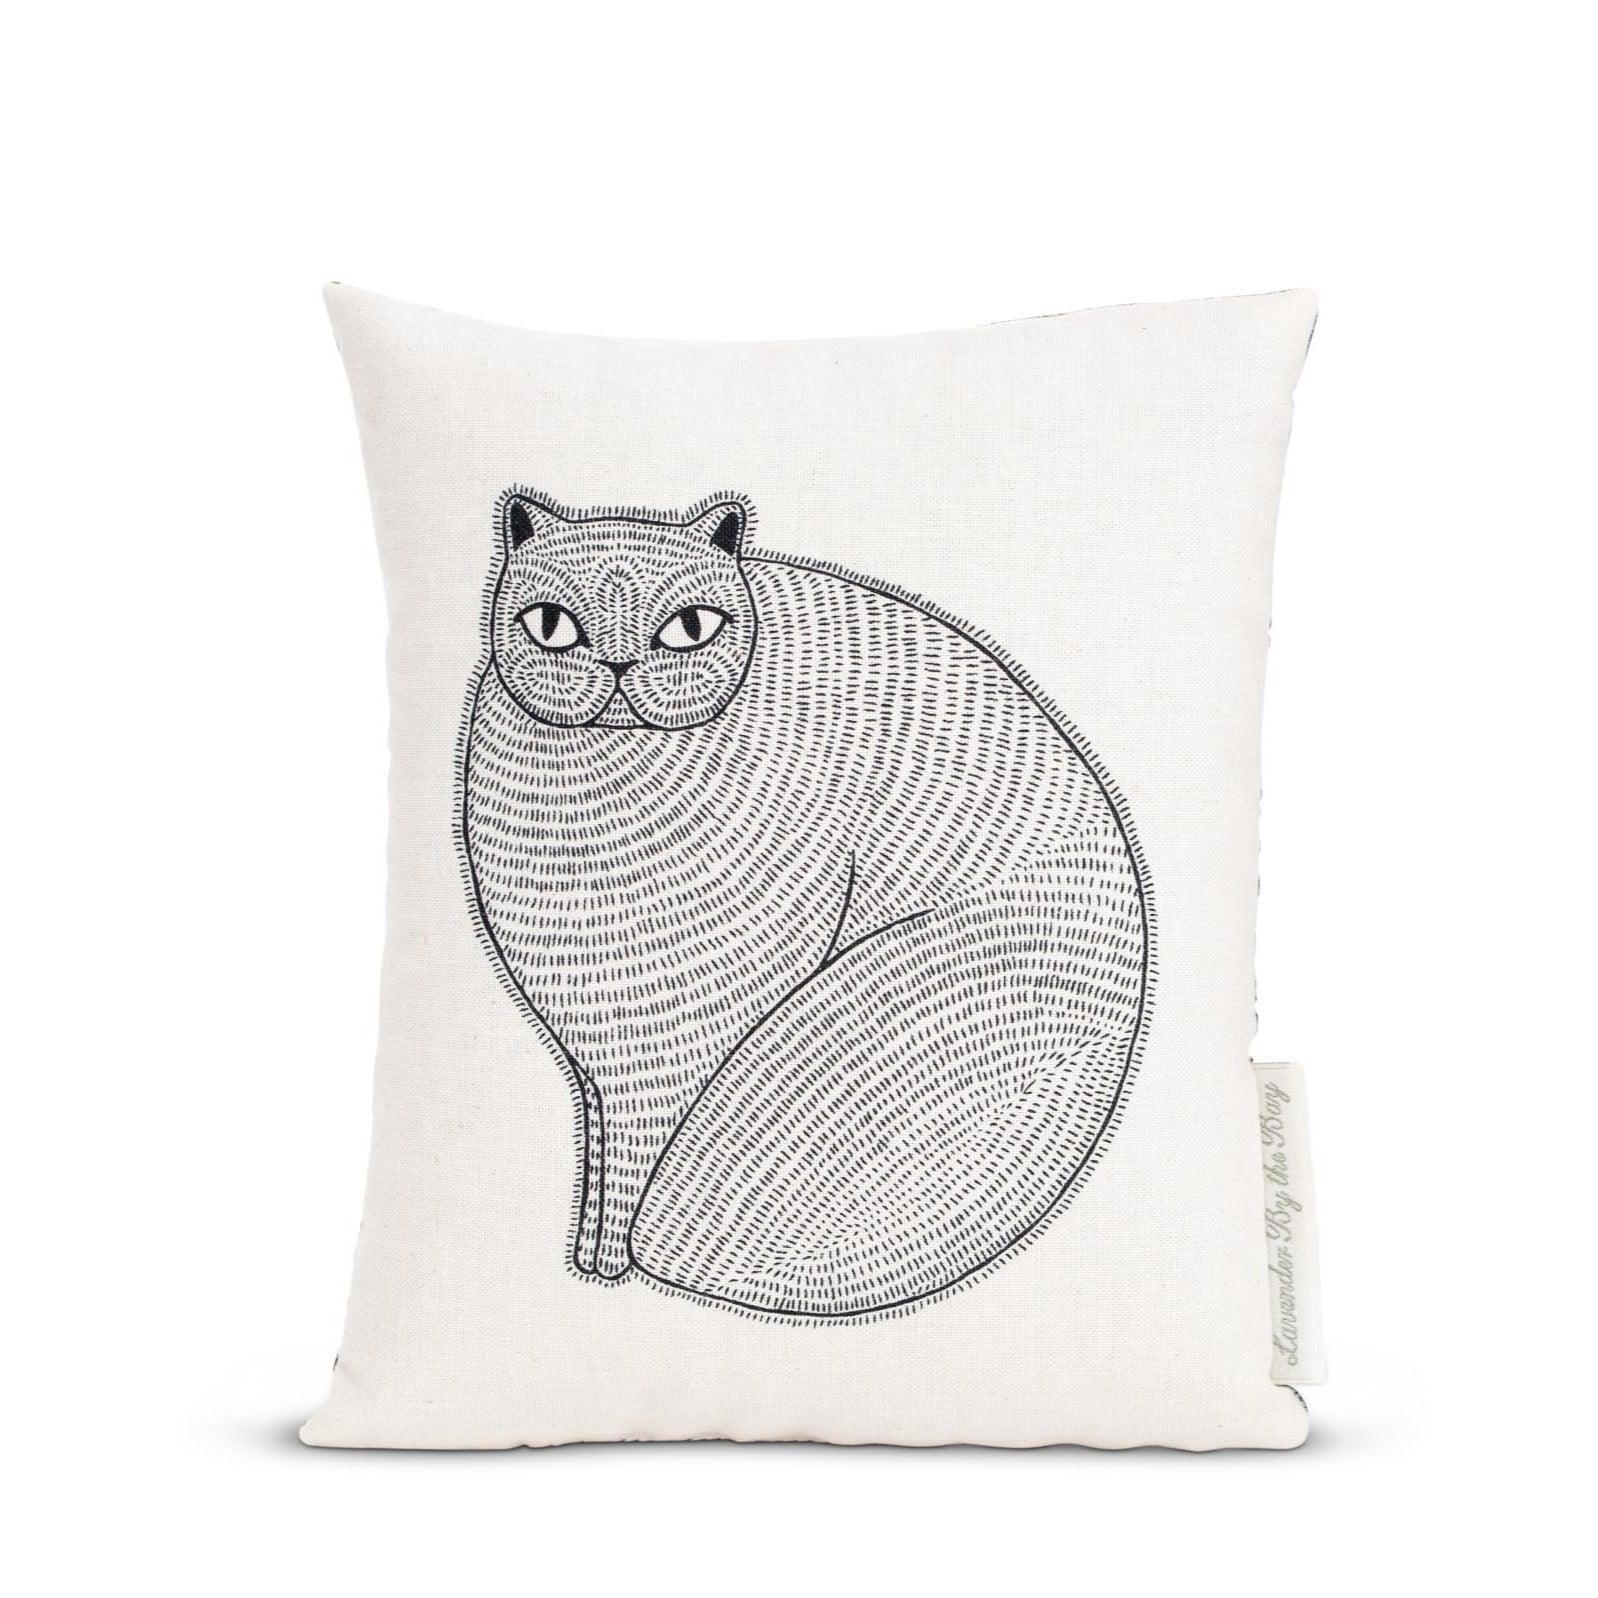 Stylized cat with dash pattern on white background